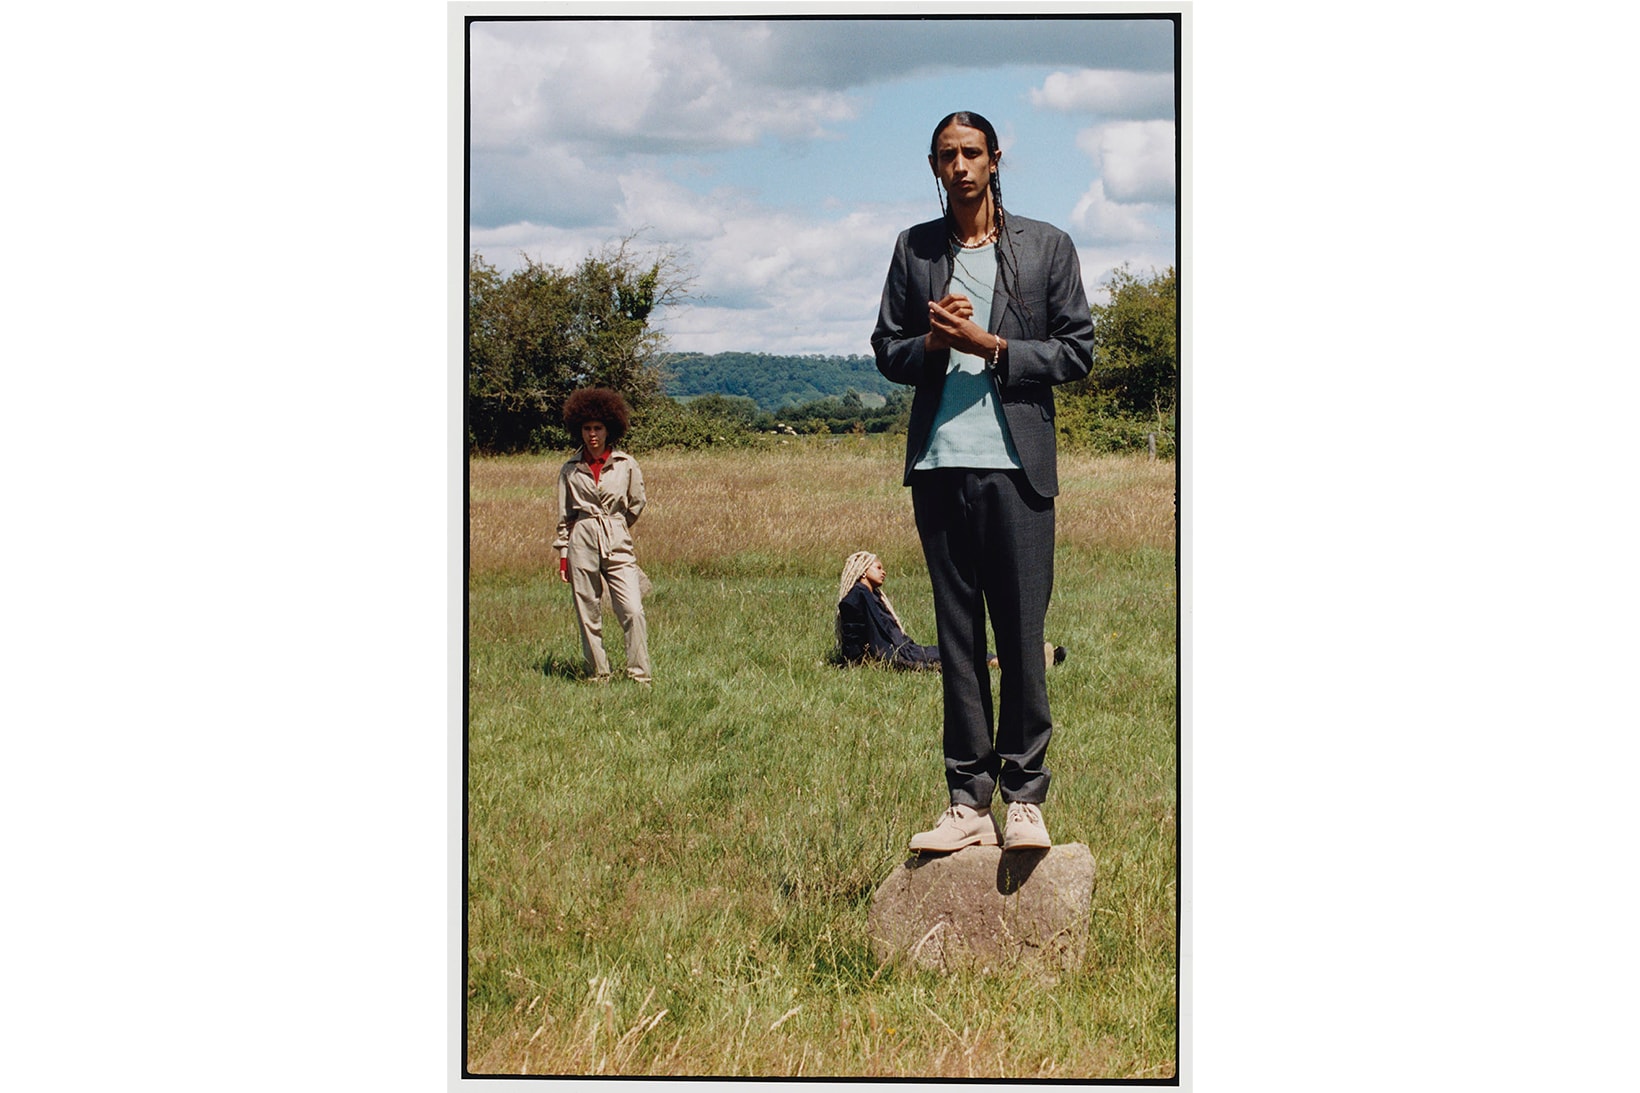 clarks fall winter campaign then now always desert boot somerset england